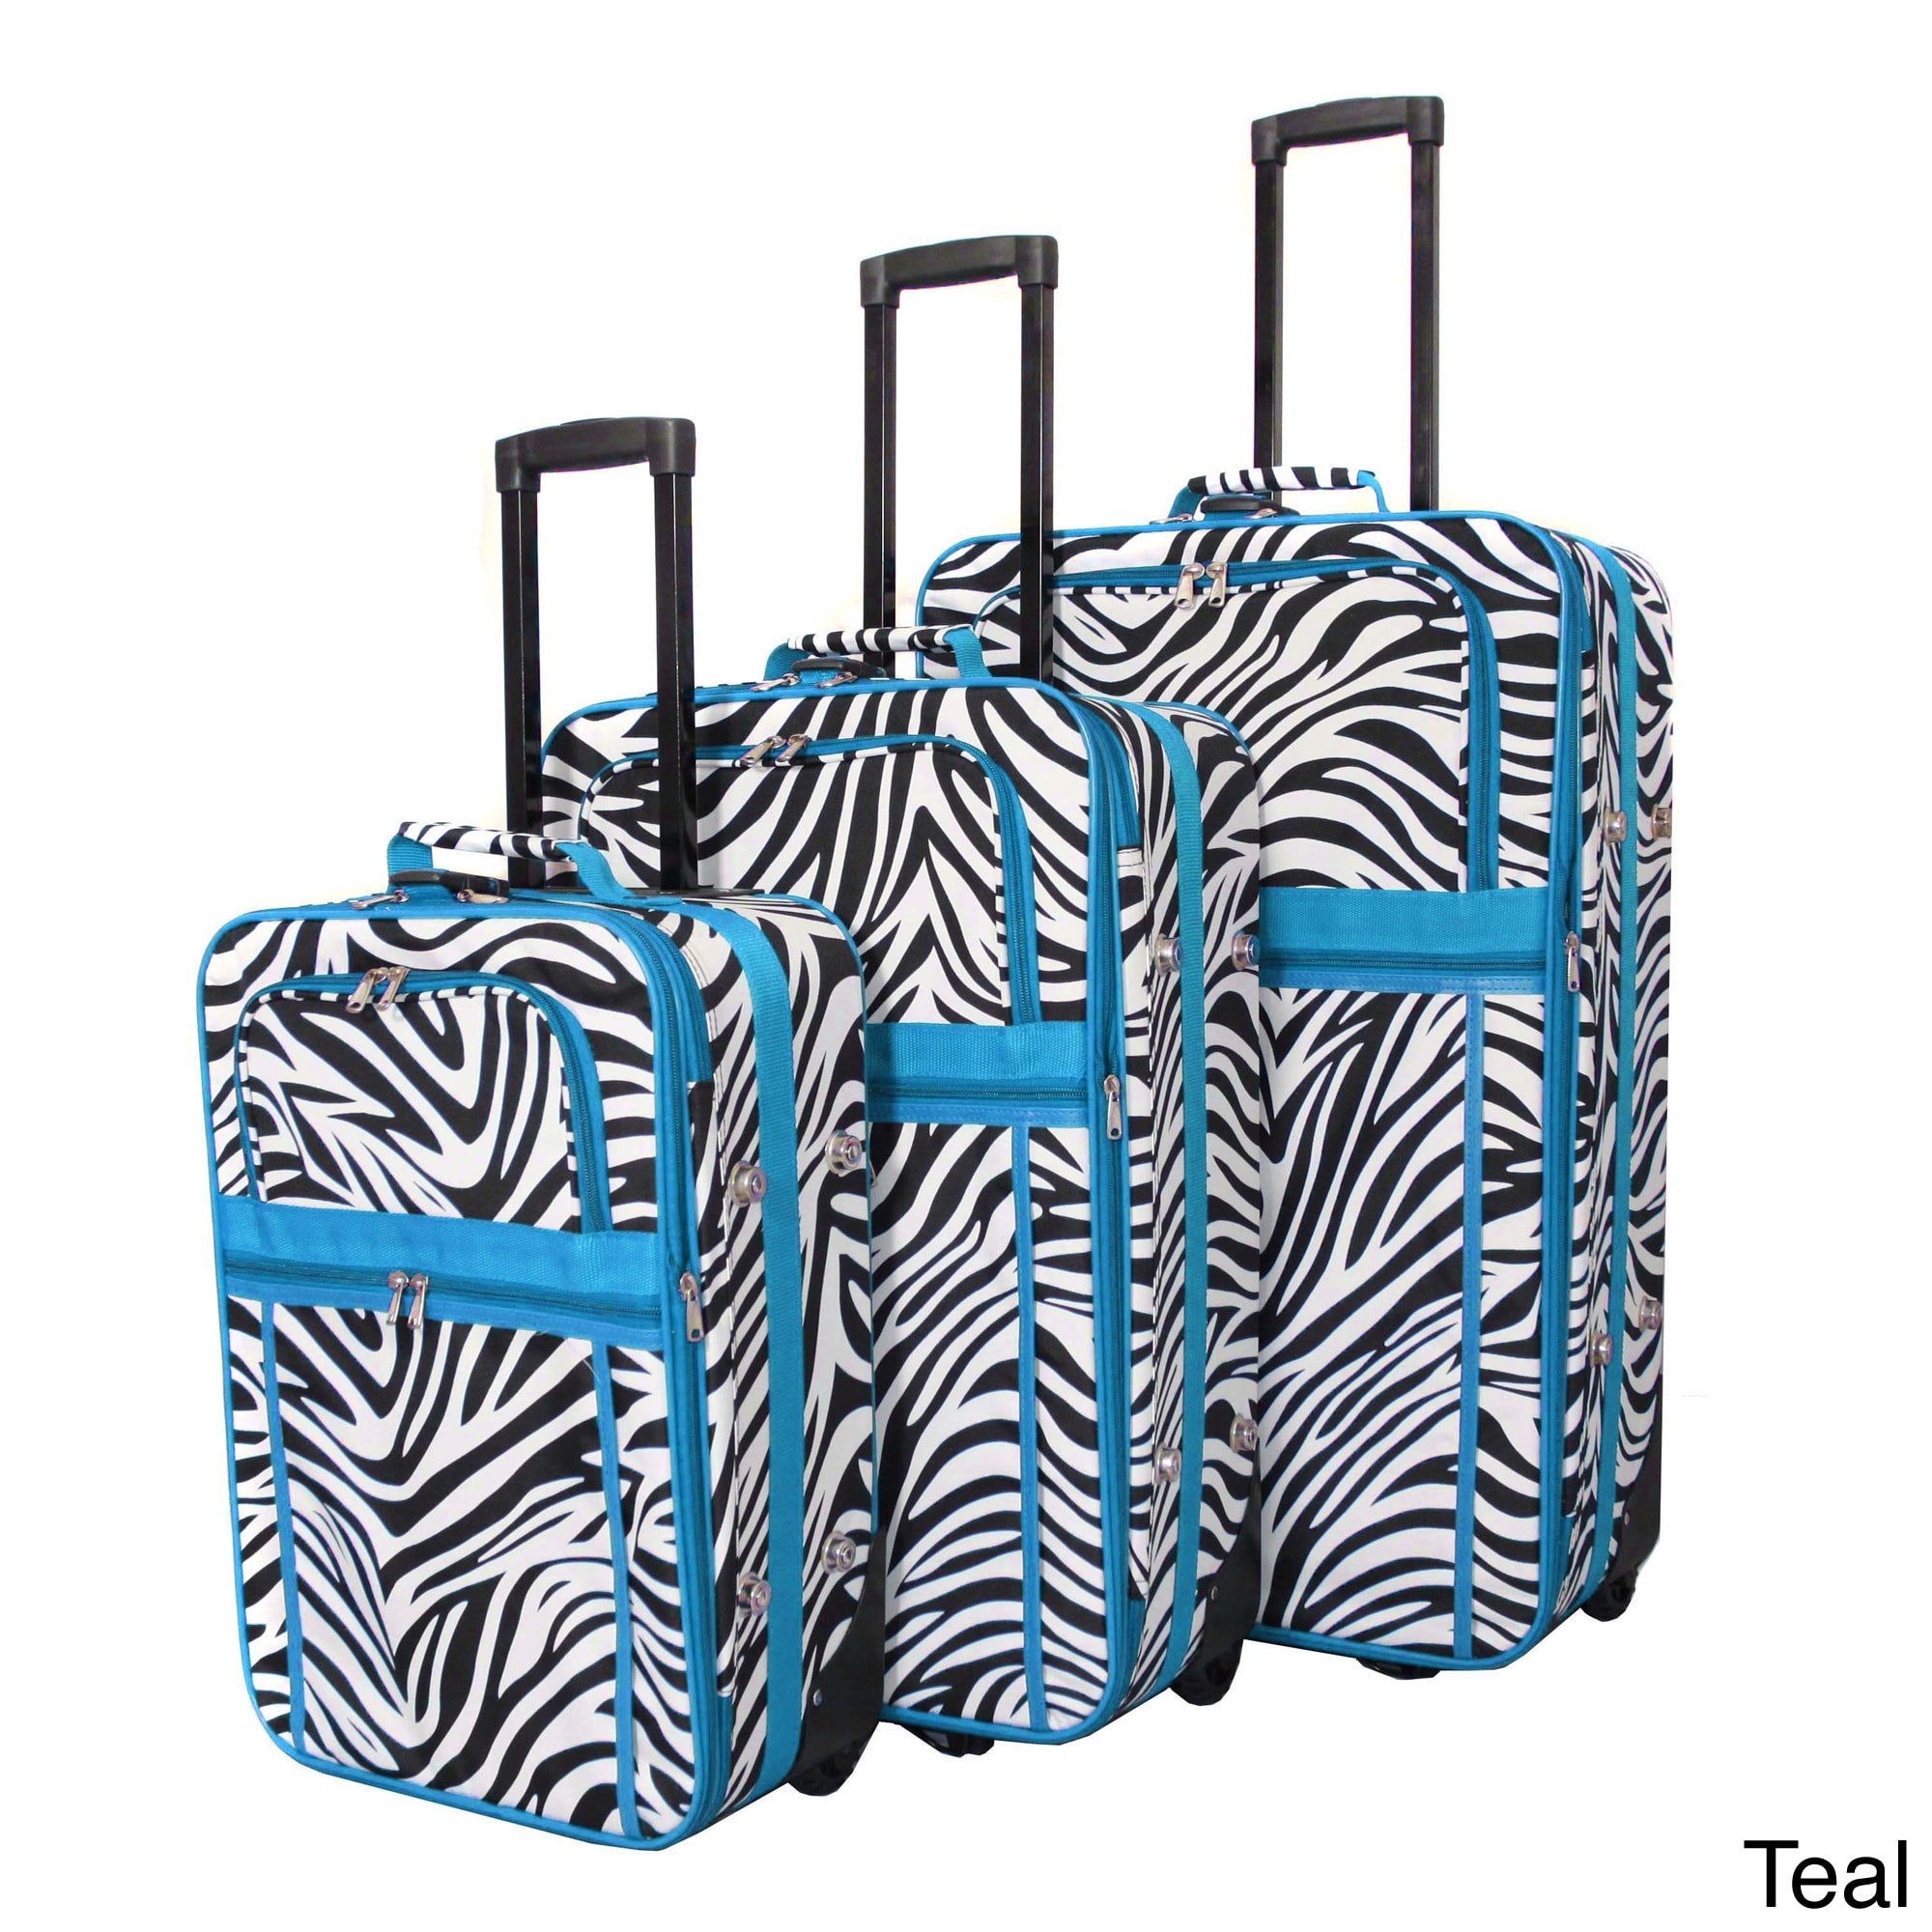 World Traveler Designer Zebra Prints 3 piece Expandable Luggage Set (Black, pink, teal, lavander, lime, red, purple, orangeMaterials 600D heavy duty polyesterPockets Two (2) front full size zipperWeight 28 inch upright (8.3 pound), 24 inch upright (7 p